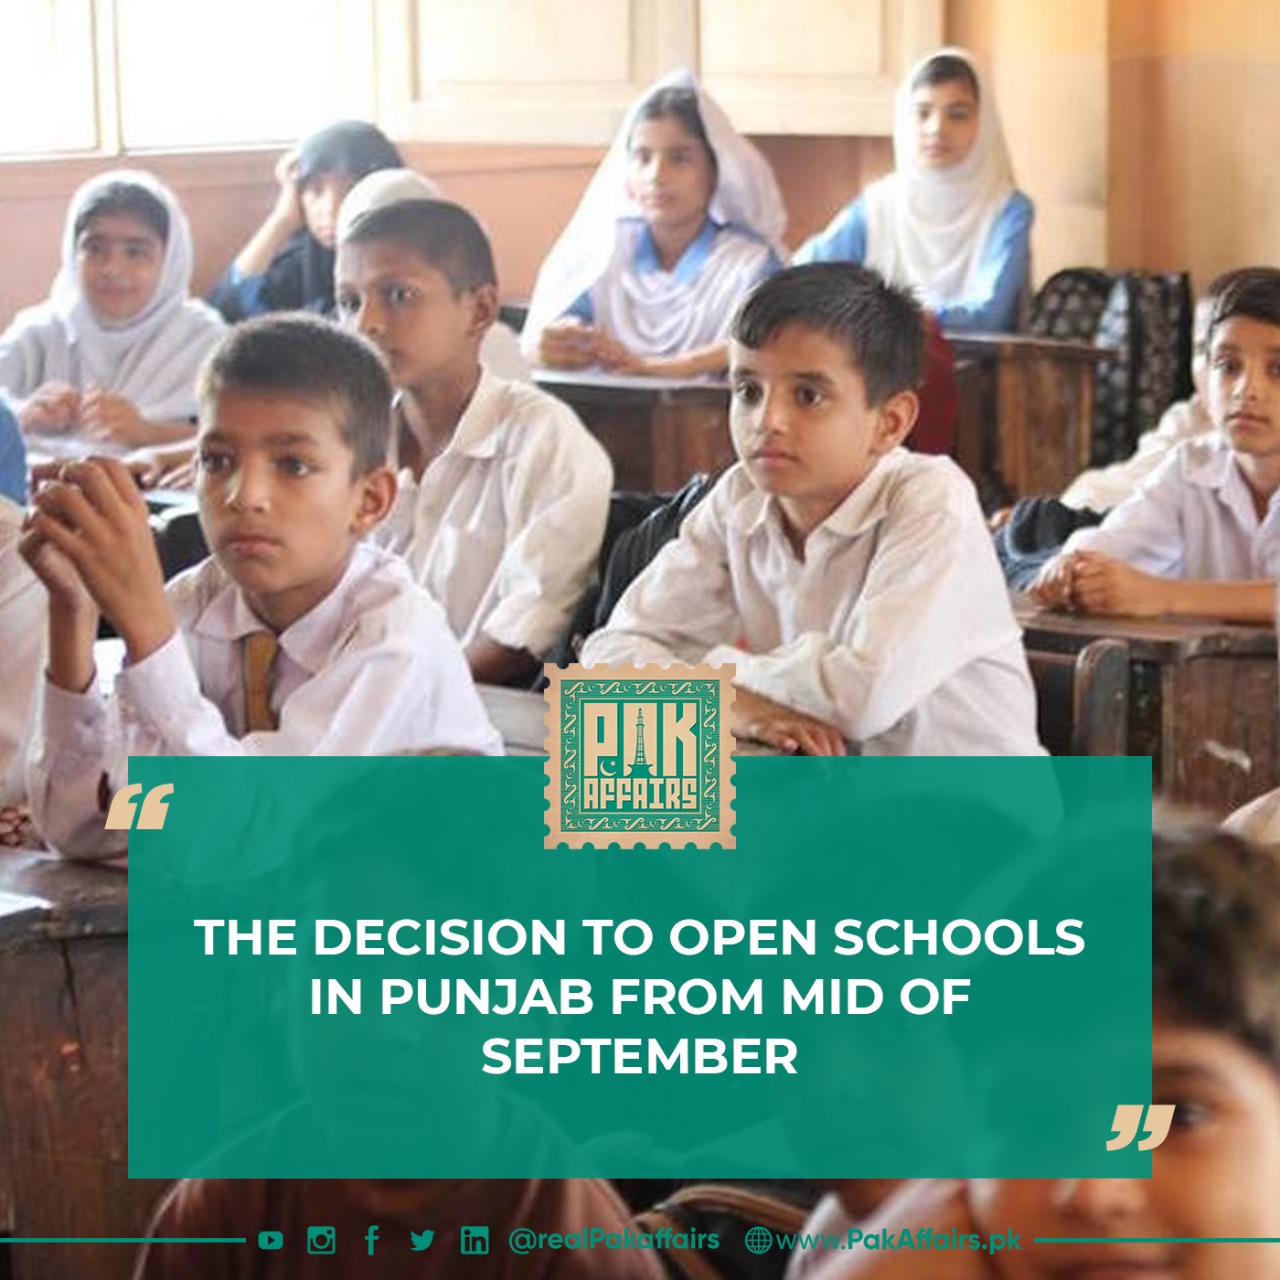 The decision to open schools in Punjab from September 15.